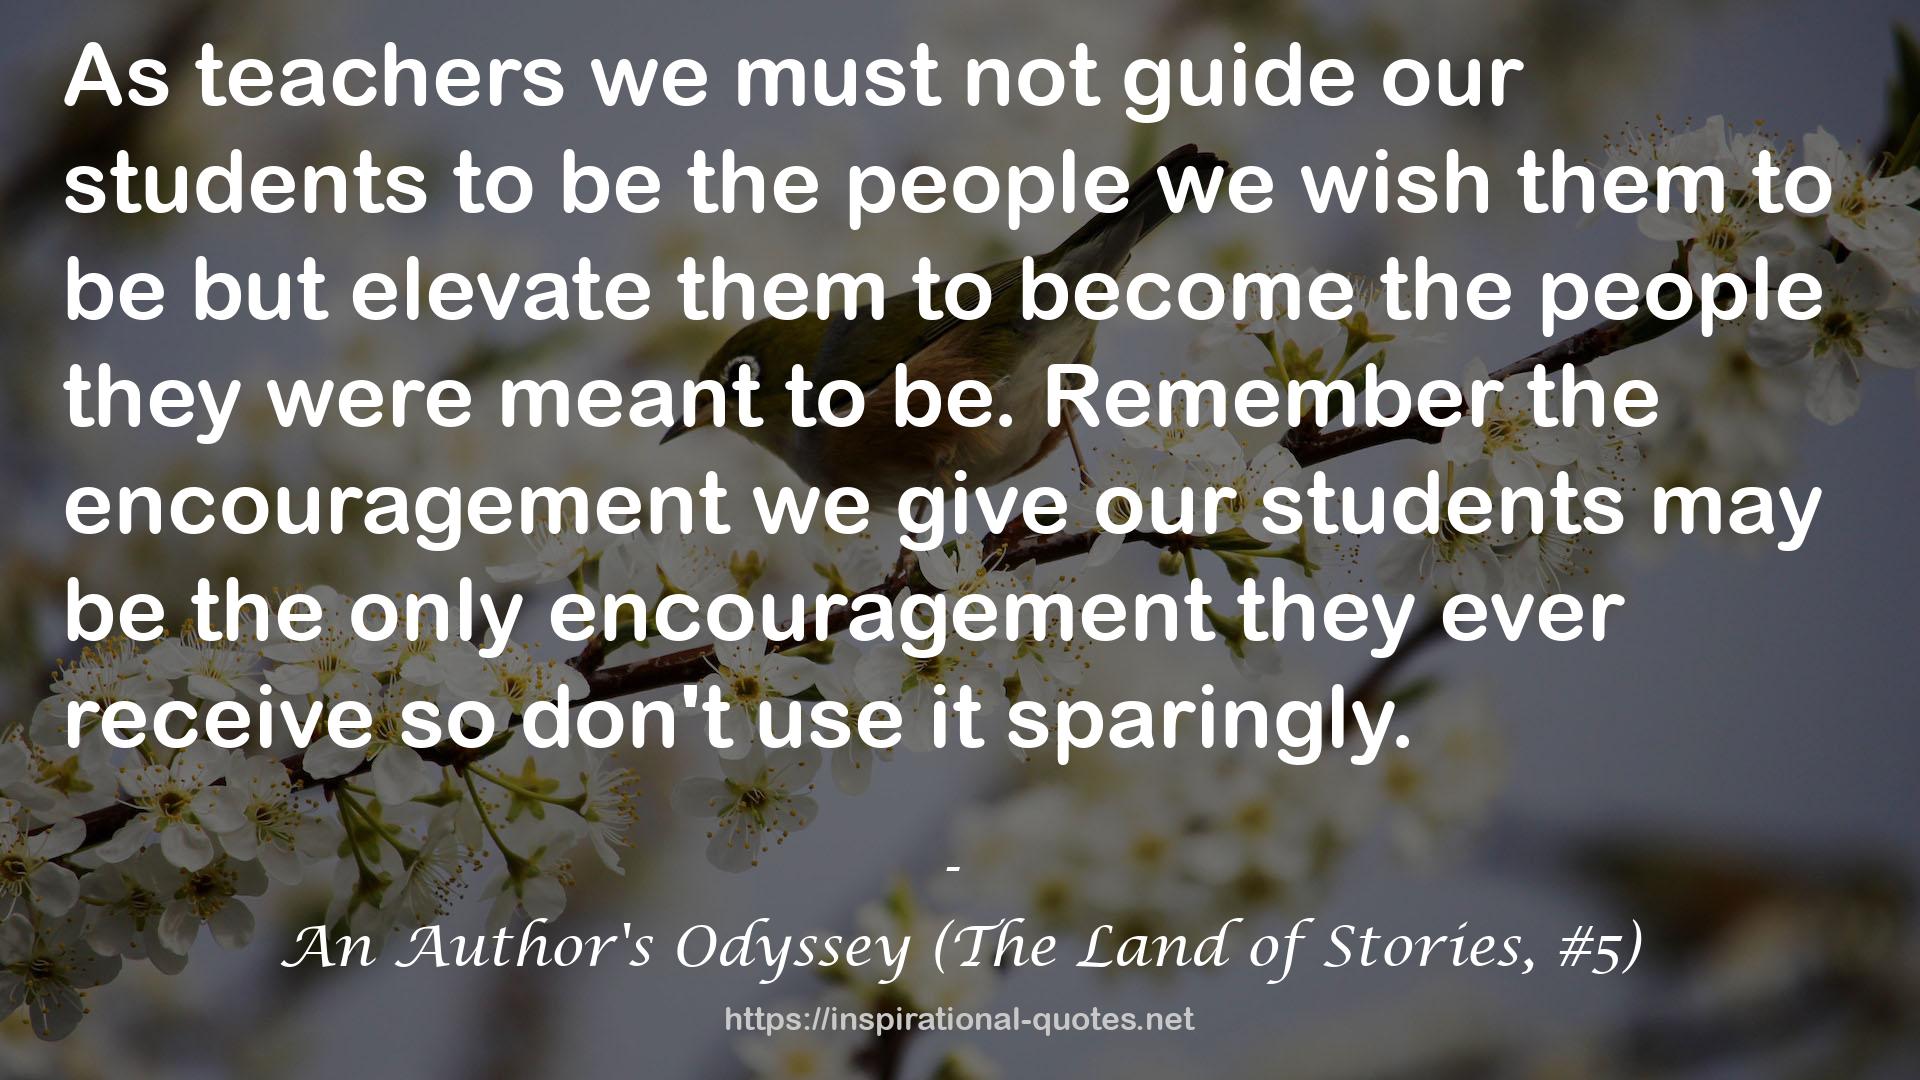 An Author's Odyssey (The Land of Stories, #5) QUOTES